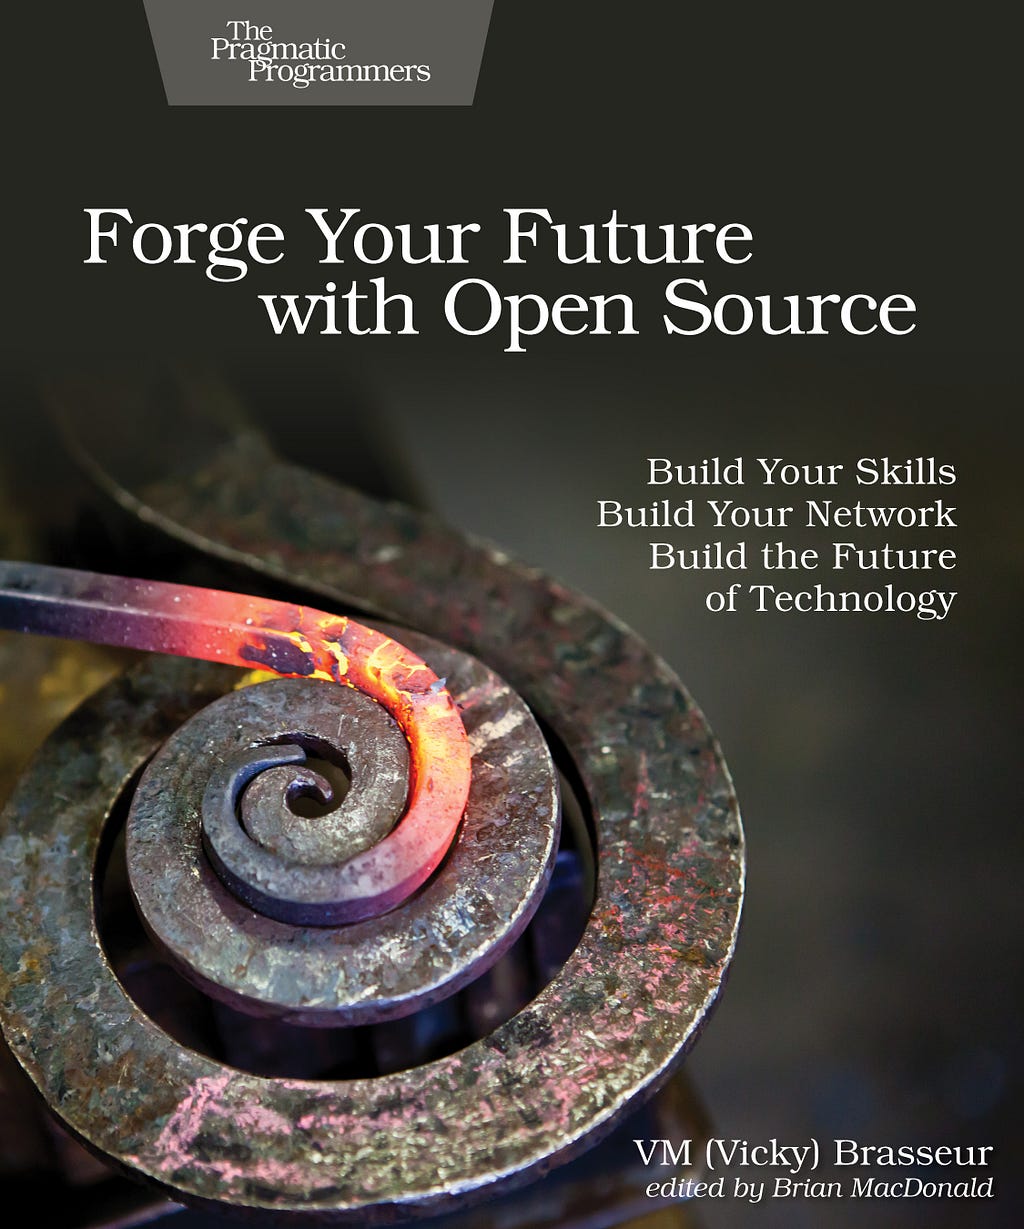 Cover of Forge Your Future with Open Source, featuring a coil of iron with a section heated to red hot